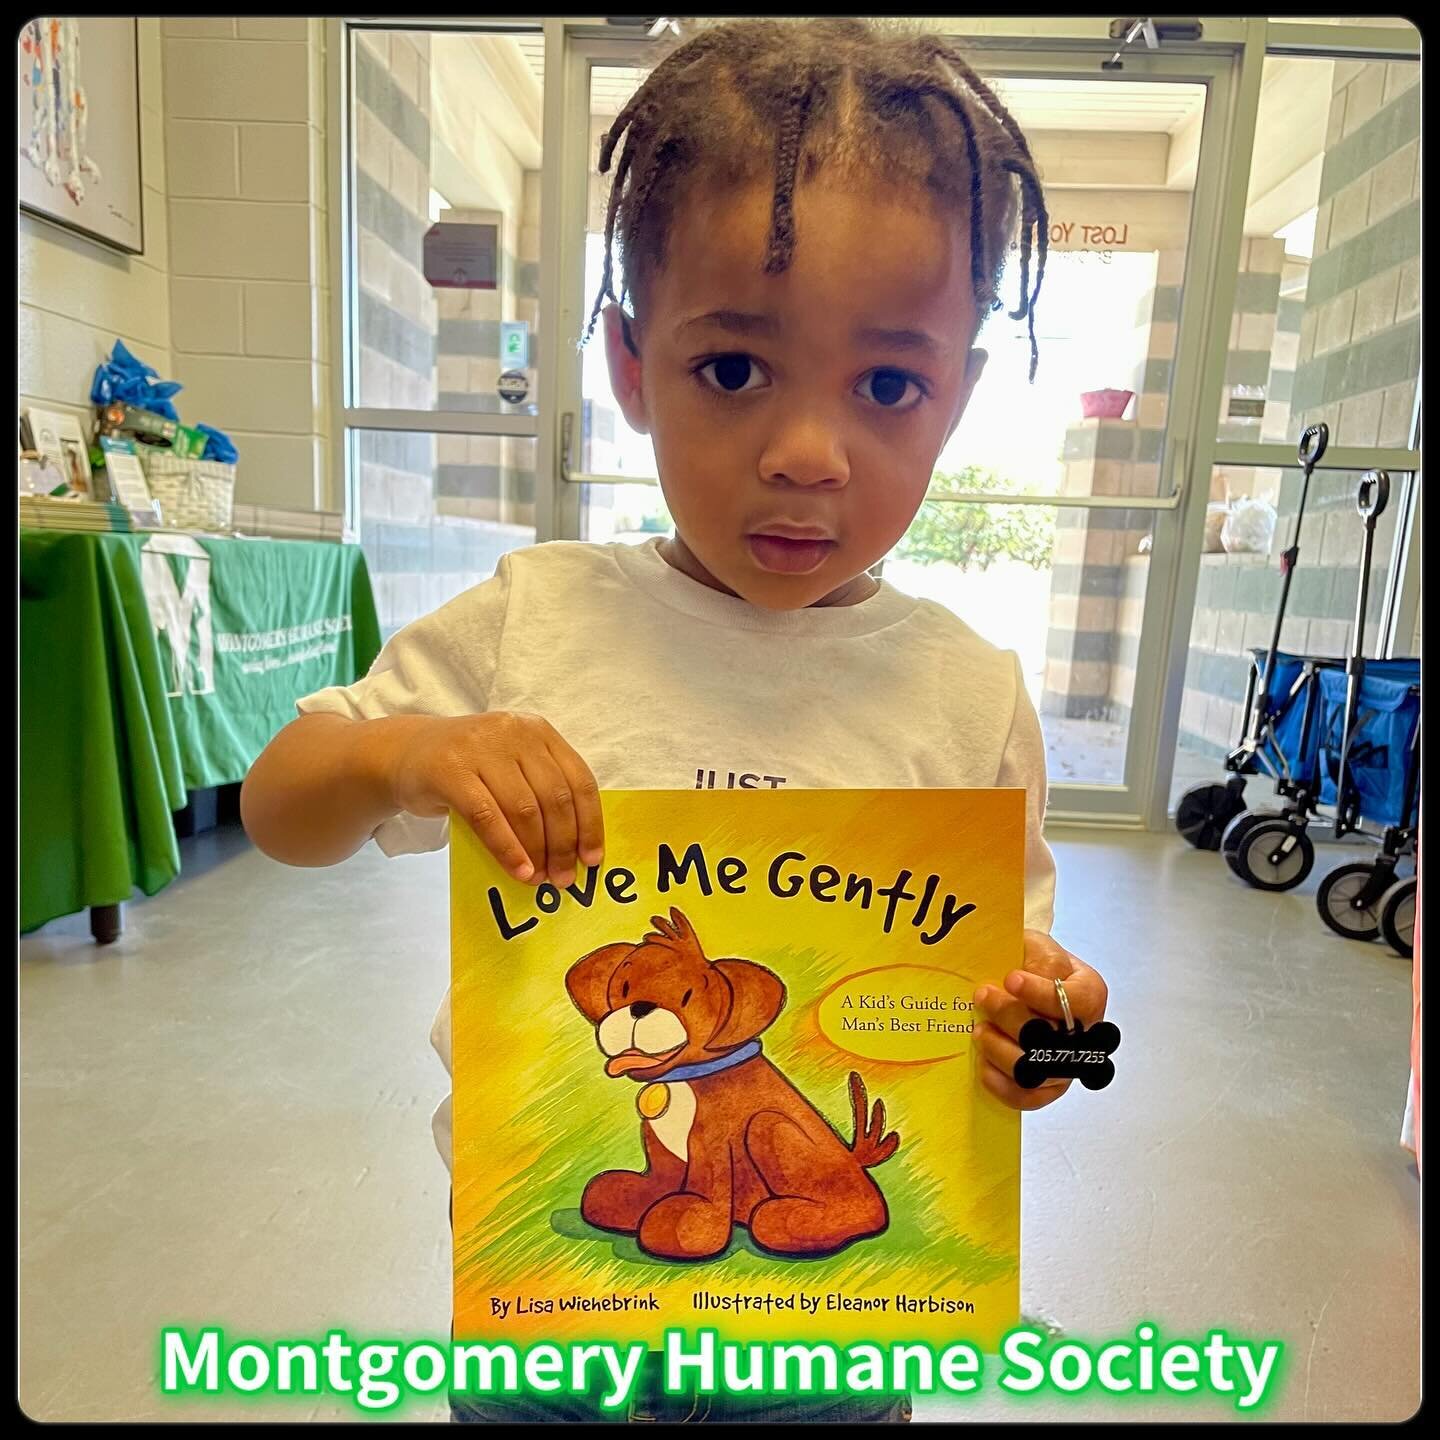 This could be the sweetest photo we&rsquo;ve ever received! #humanesociety #montgomery #alabama #bookdonation #dog #booksforkids #kindness #compassion #empathy #mansbestfriend #kidsanddogs #kidsandpets #responsiblepetownership #humanepartner @montgom